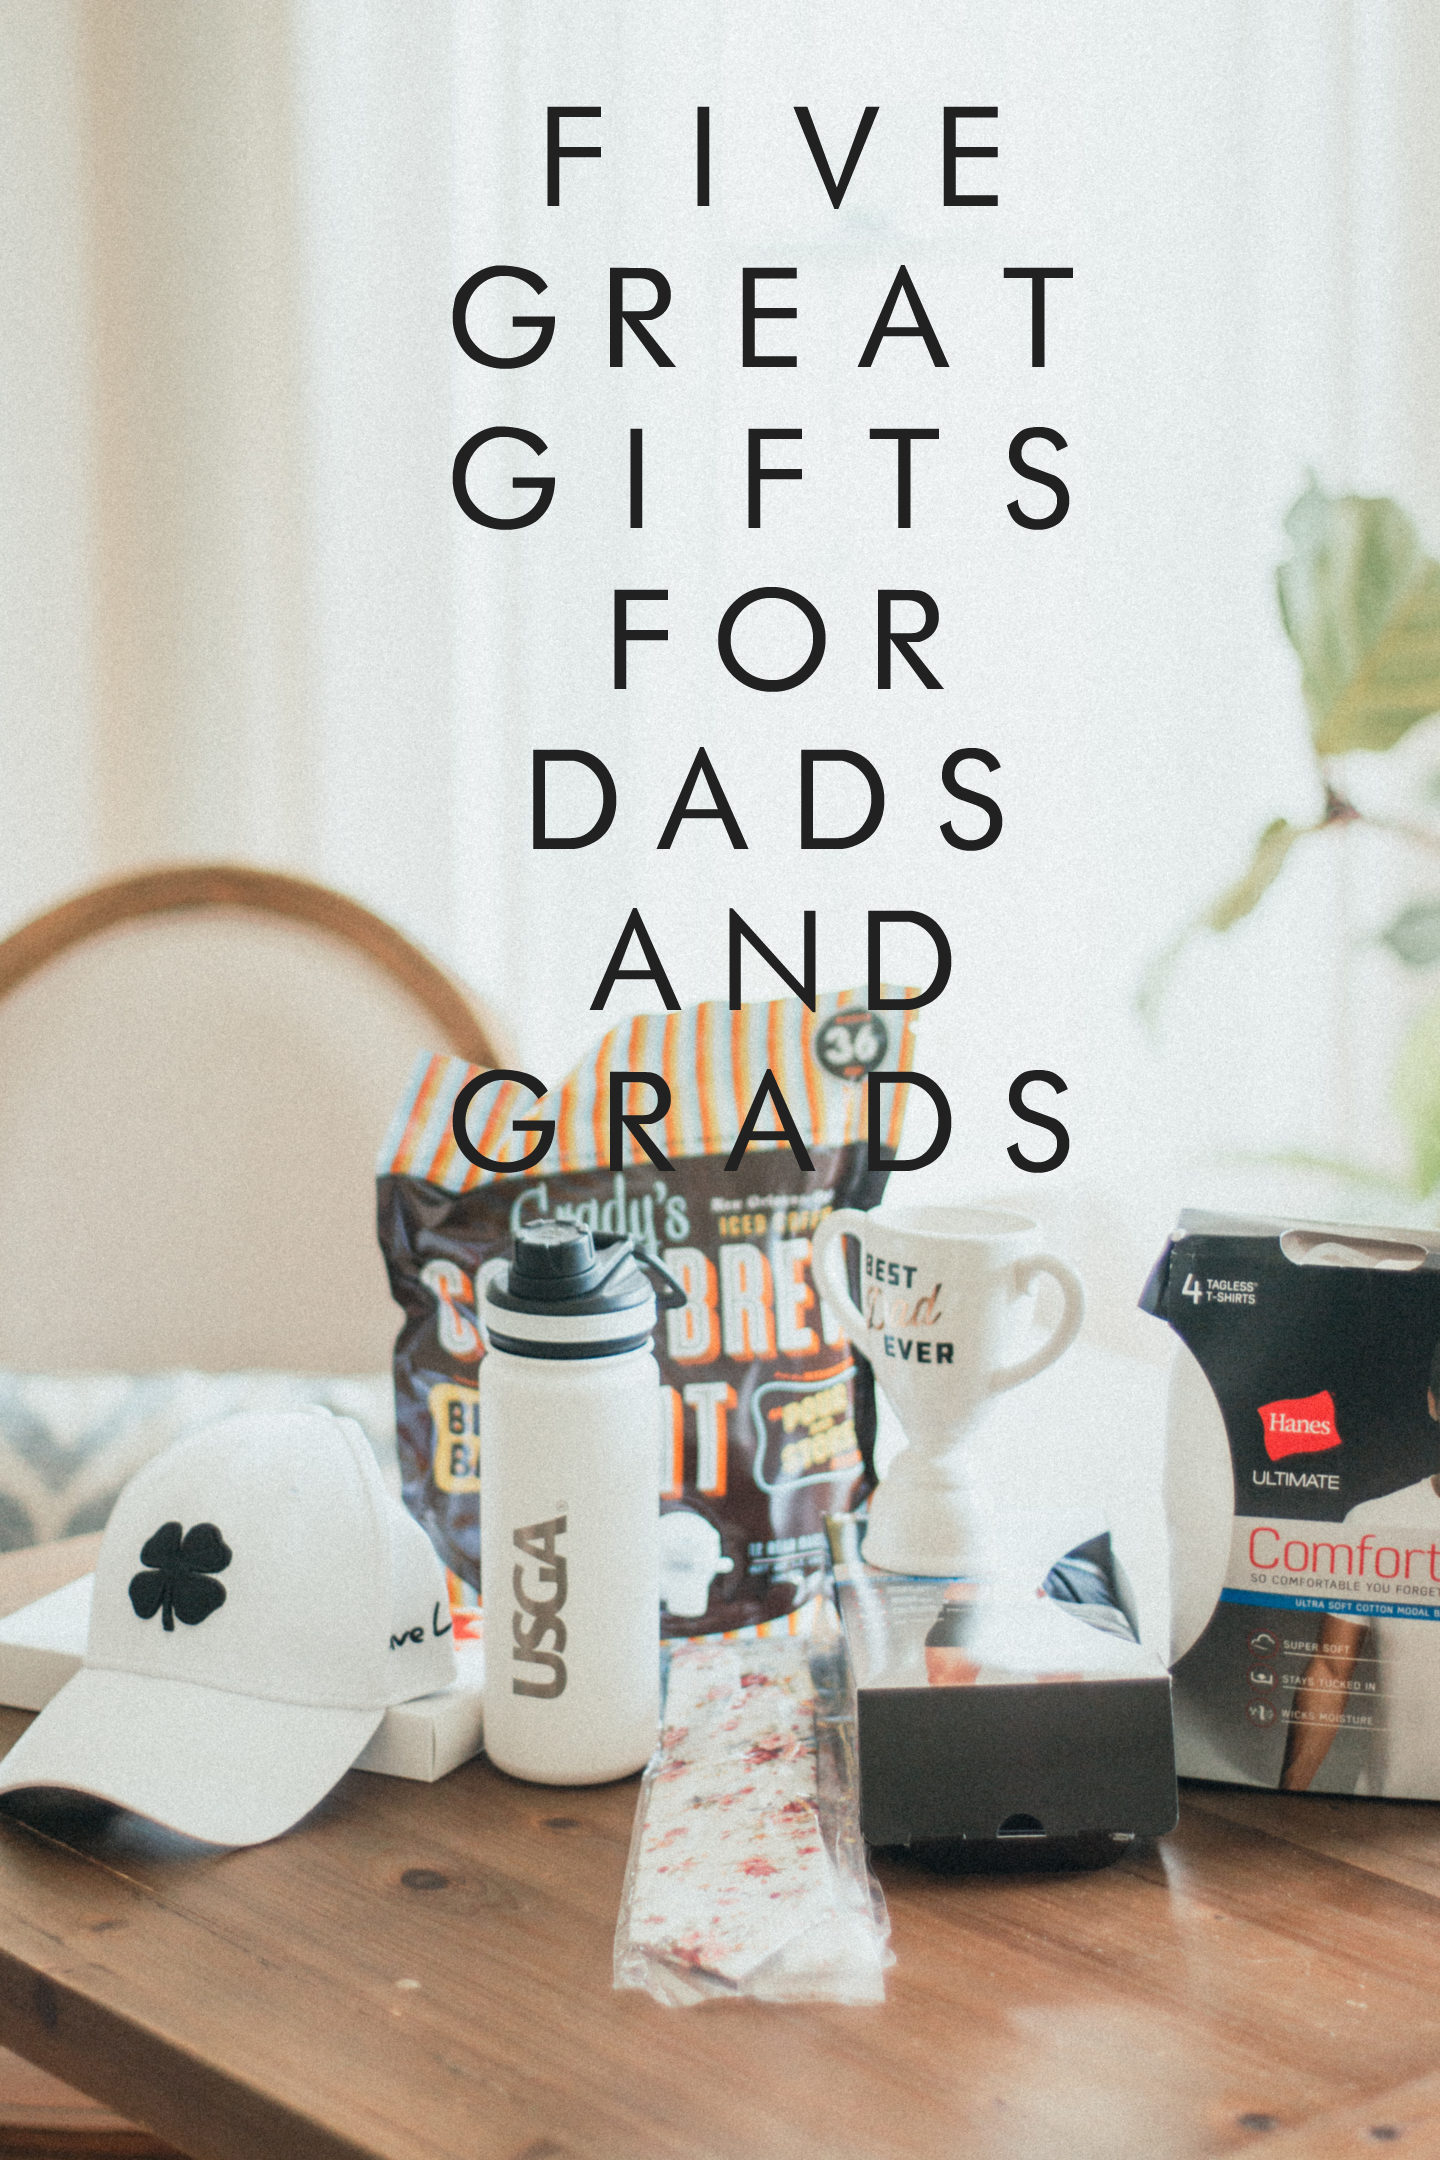 5 great gifts for dads and grads